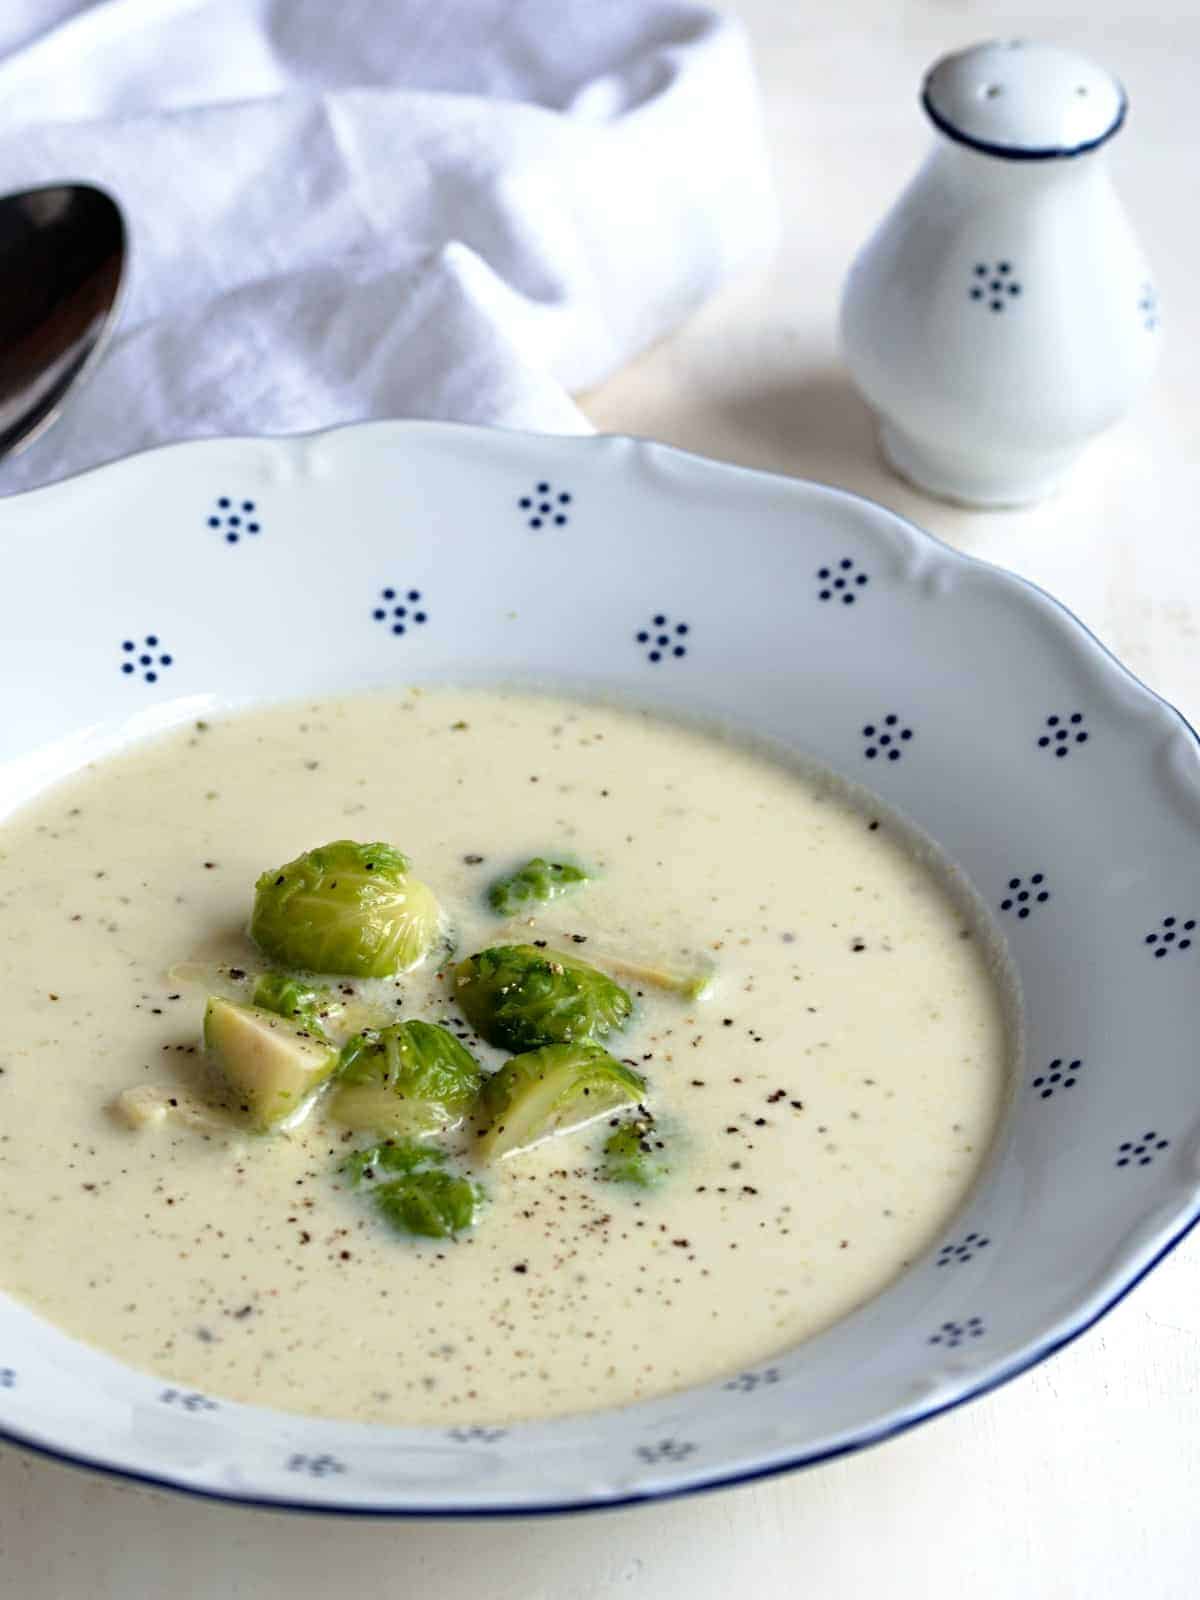 Czech-style brussels sprout soup served in a bowl.